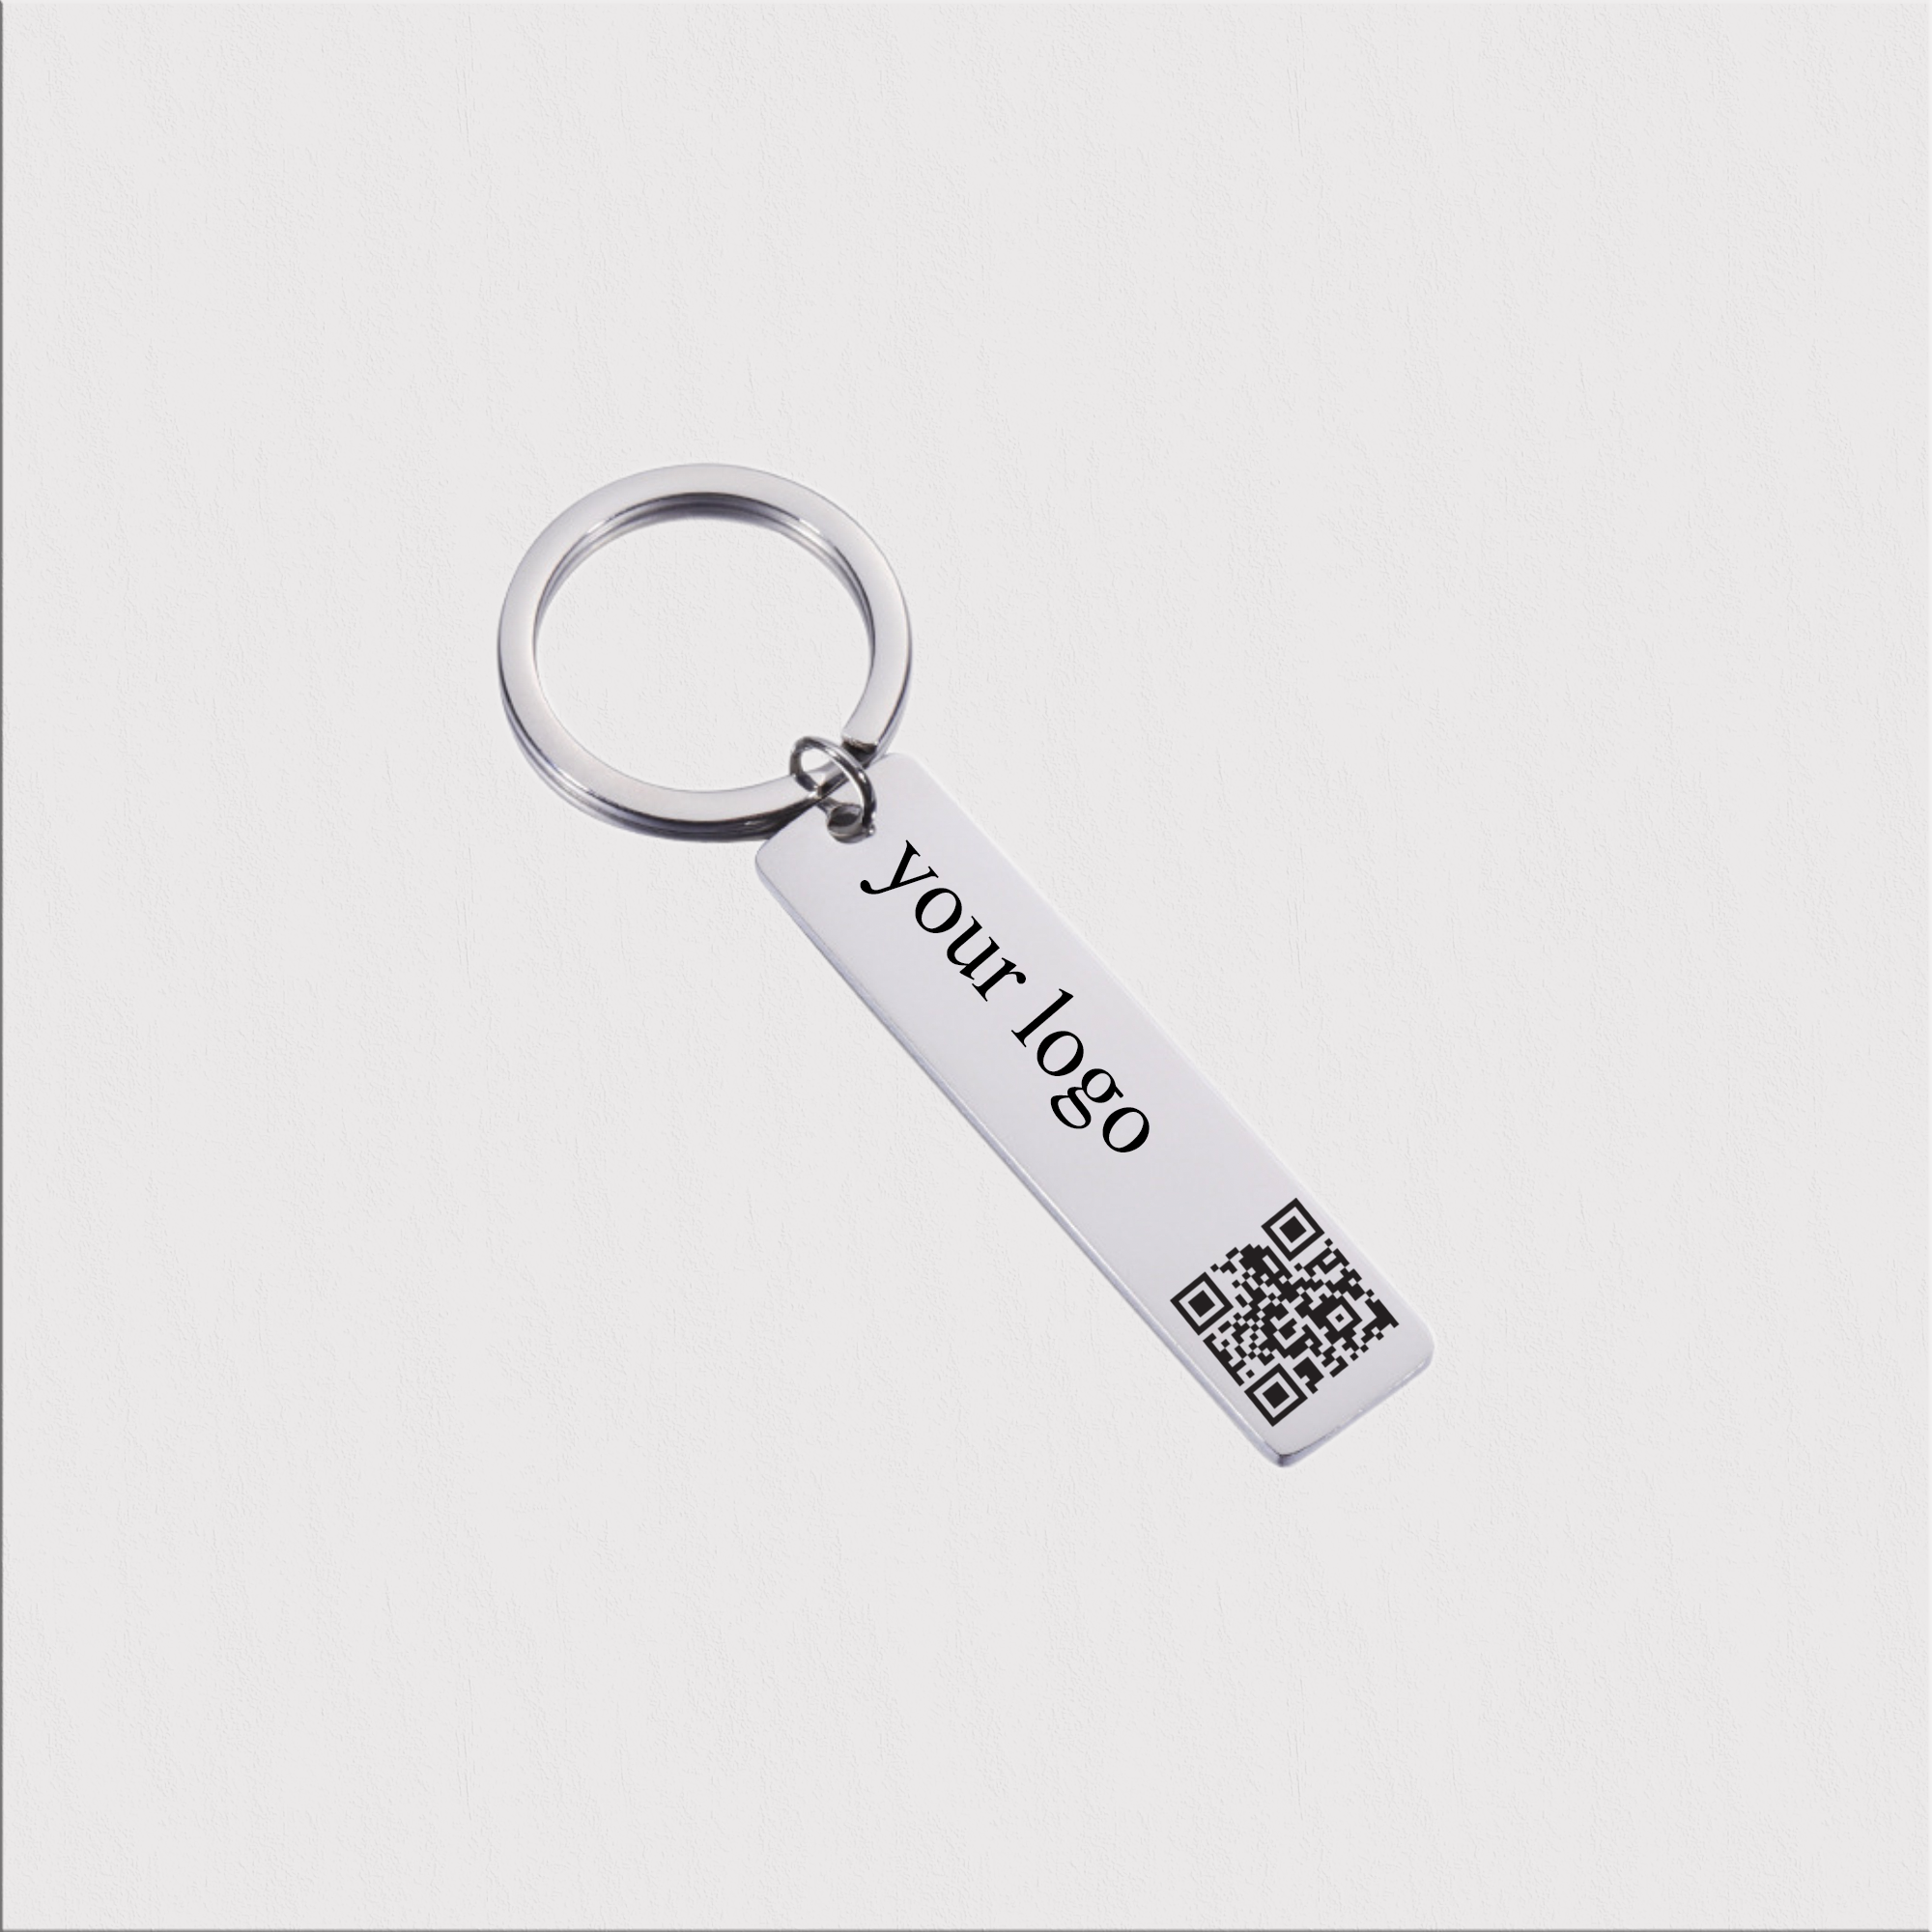 Business All Socical Media Keychain KCK 4 C